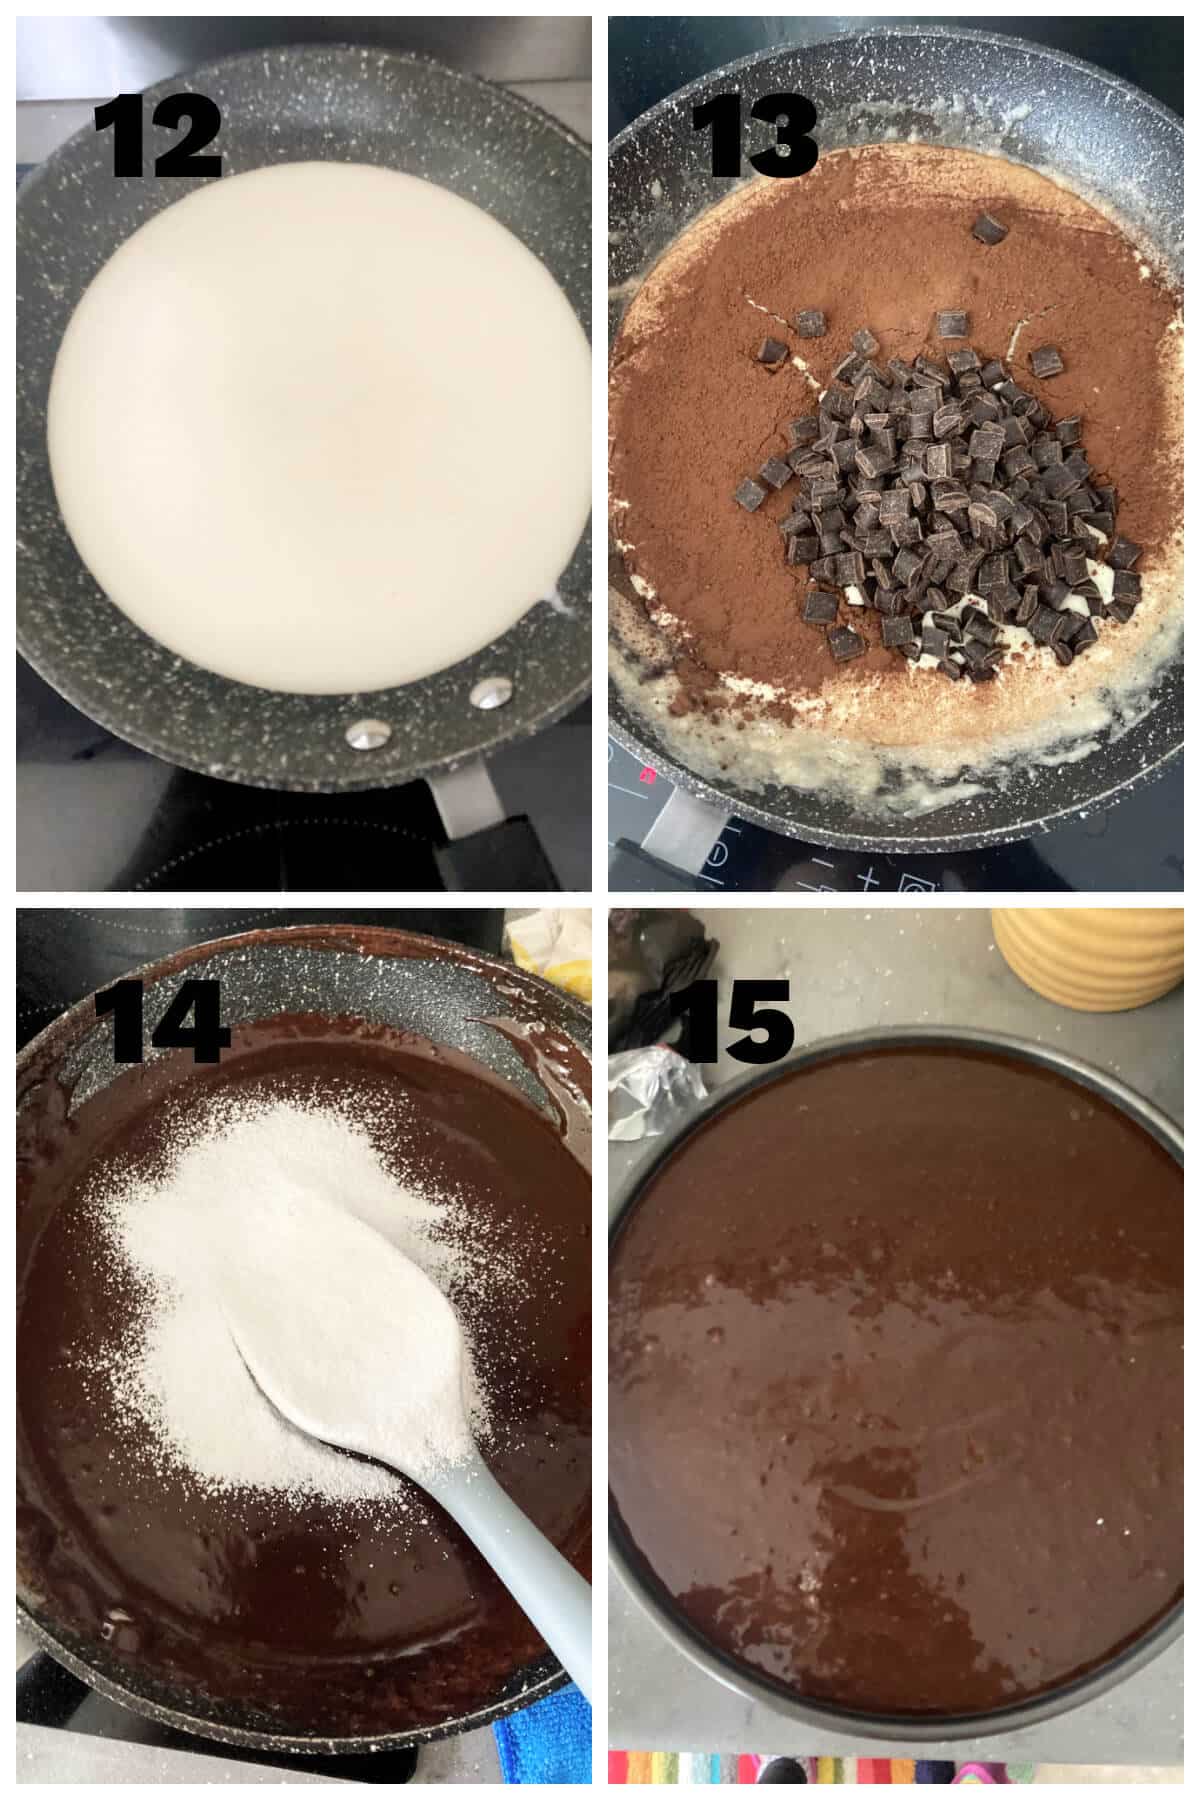 Collage of 4 photos to show how to make chocolate glaze